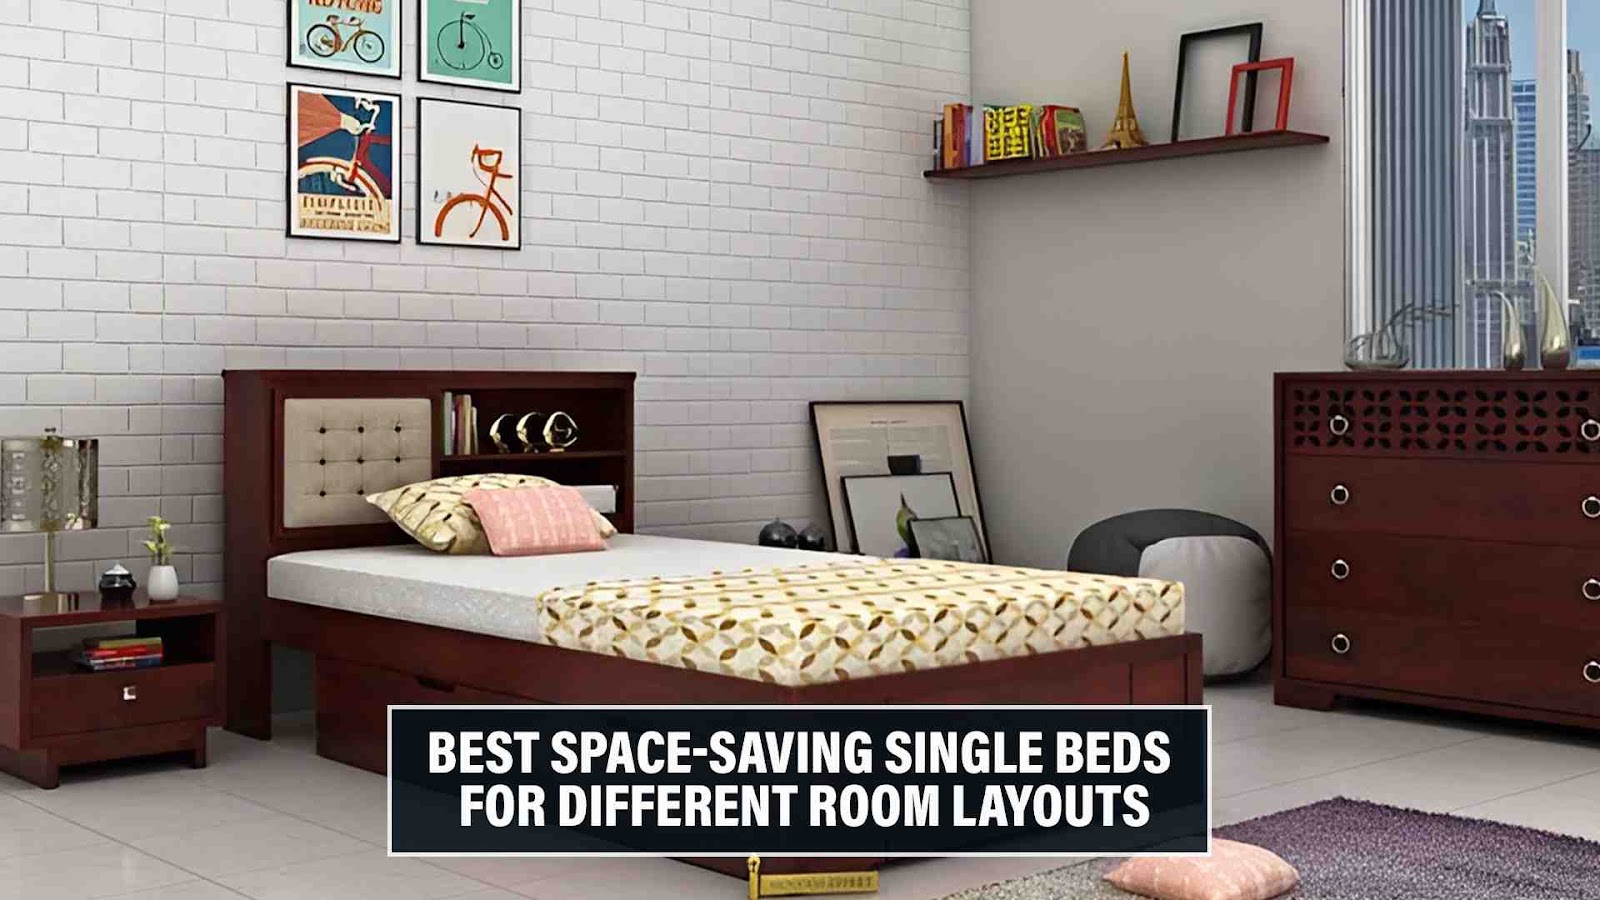 Best Space-Saving Single Beds for Different Room Layouts: